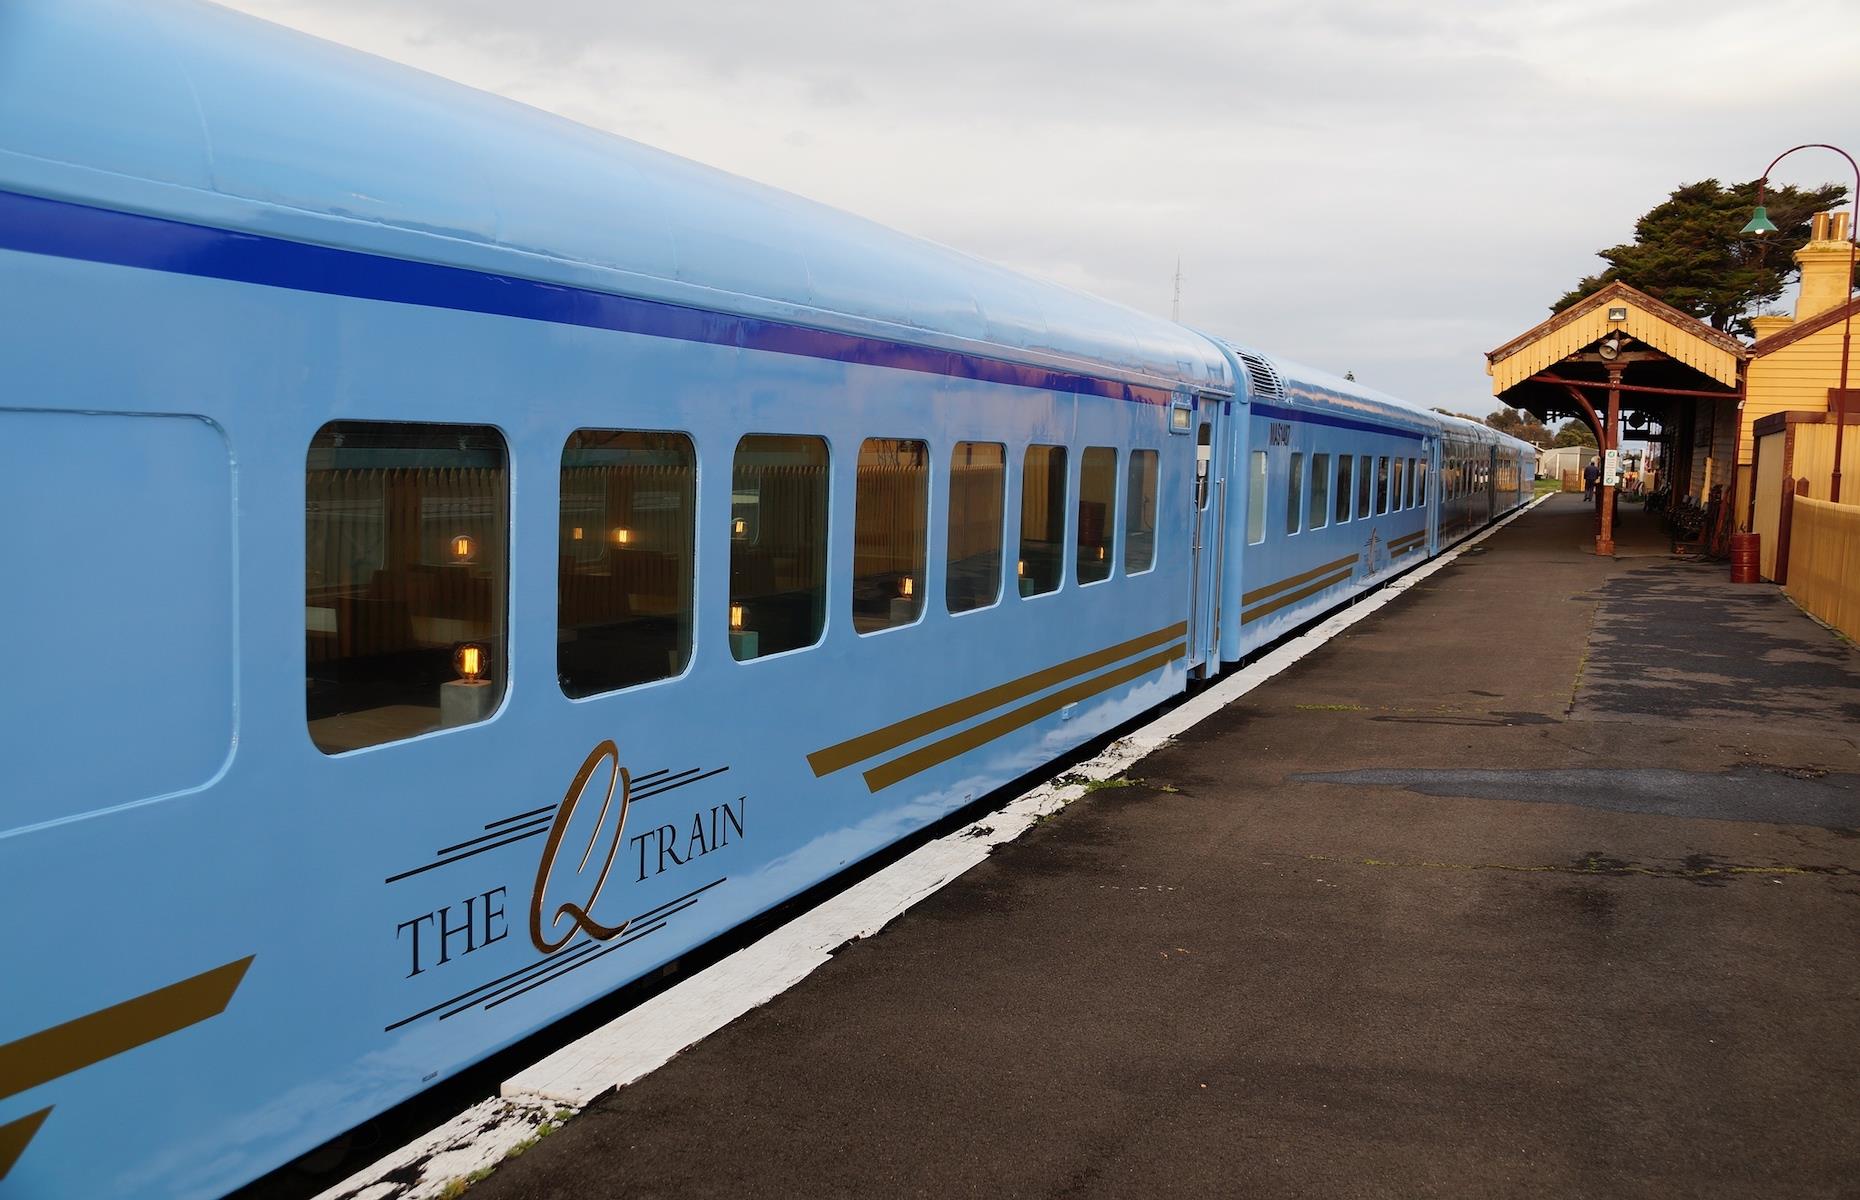 <p>All aboard, foodies: Victoria’s <a href="https://www.theqtrain.com.au">Q Train</a> is quite the hot culinary ticket. Travelling along the 10 mile (16km) Bellarine Railway from the historic Drysdale station, this railway journey is all about drinking in the views as you savour wines and produce from the bucolic Bellarine Peninsula. Over a luxurious three-hour trip between Drysdale and Queenscliff, passengers feast on a six-course degustation menu while seated in refurbished rail dining cars.</p>  <p><a href="http://bit.ly/3roL4wv"><strong>Love this? Follow our Facebook page for more train-travel inspiration</strong></a></p>